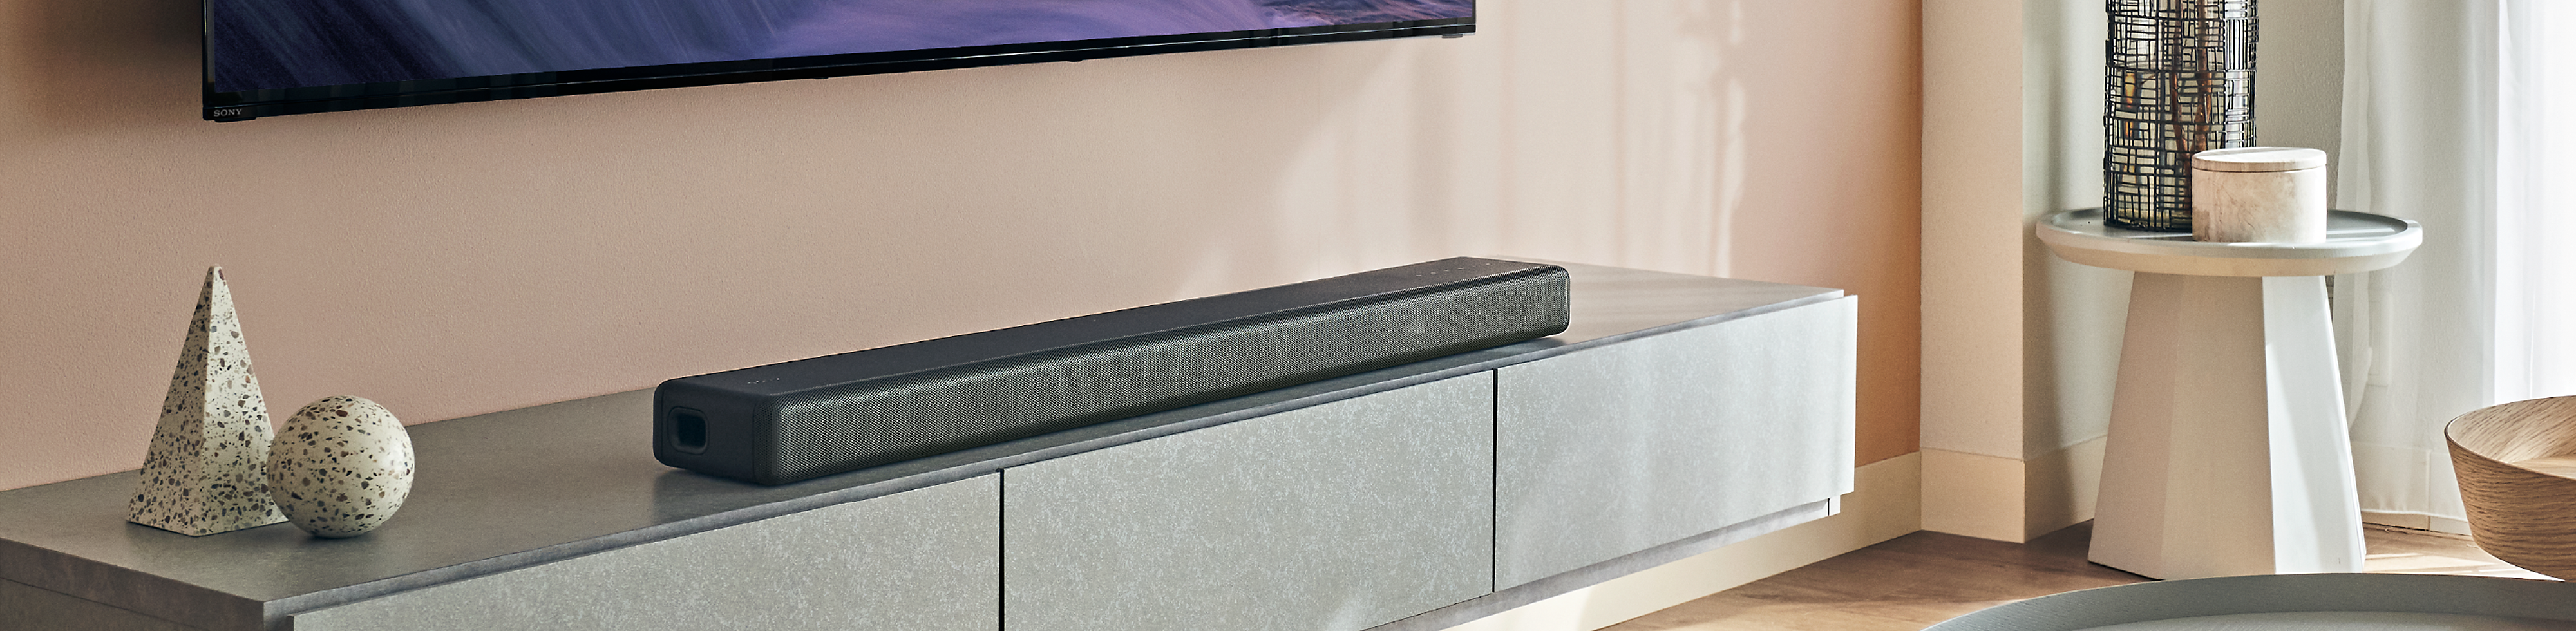 A bright, contemporary living room featuring an HT-A3000 soundbar positioned underneath a wall-mounted BRAVIA TV